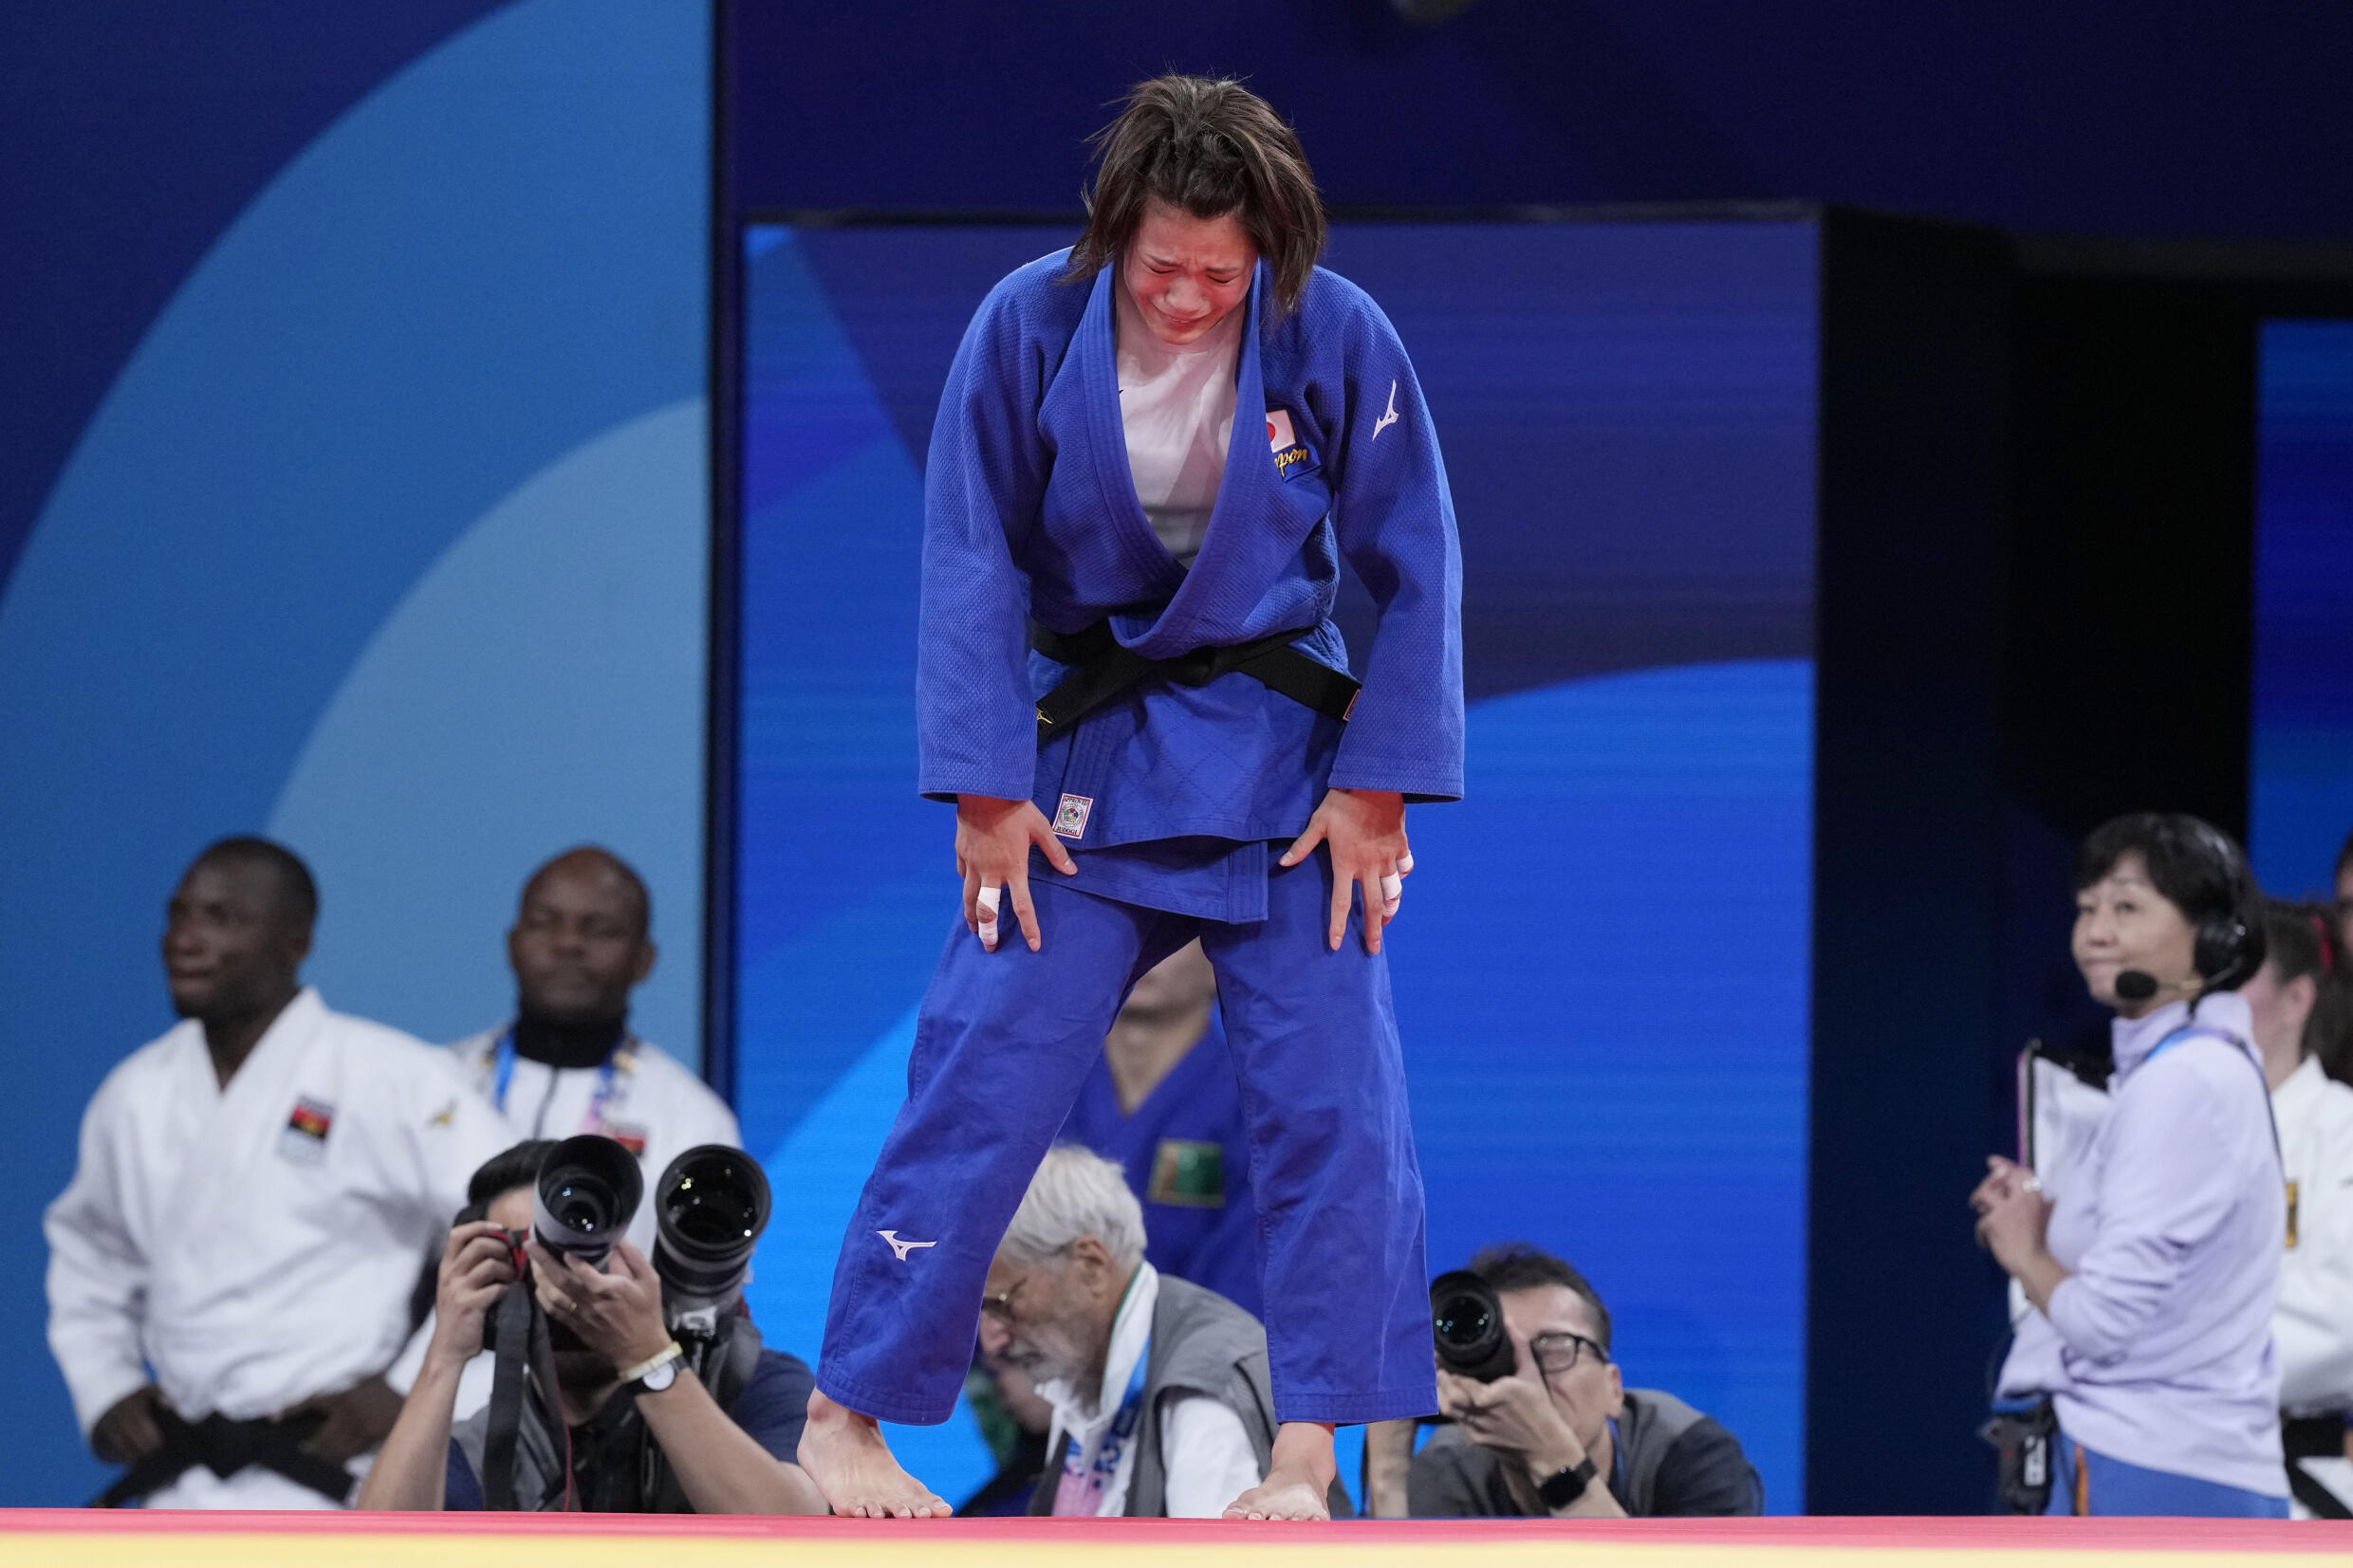 After the shock, tears came for Uta Abe on the tatami of the Champ-de-Mars, the scene of the judo fights at the 2024 Olympics.